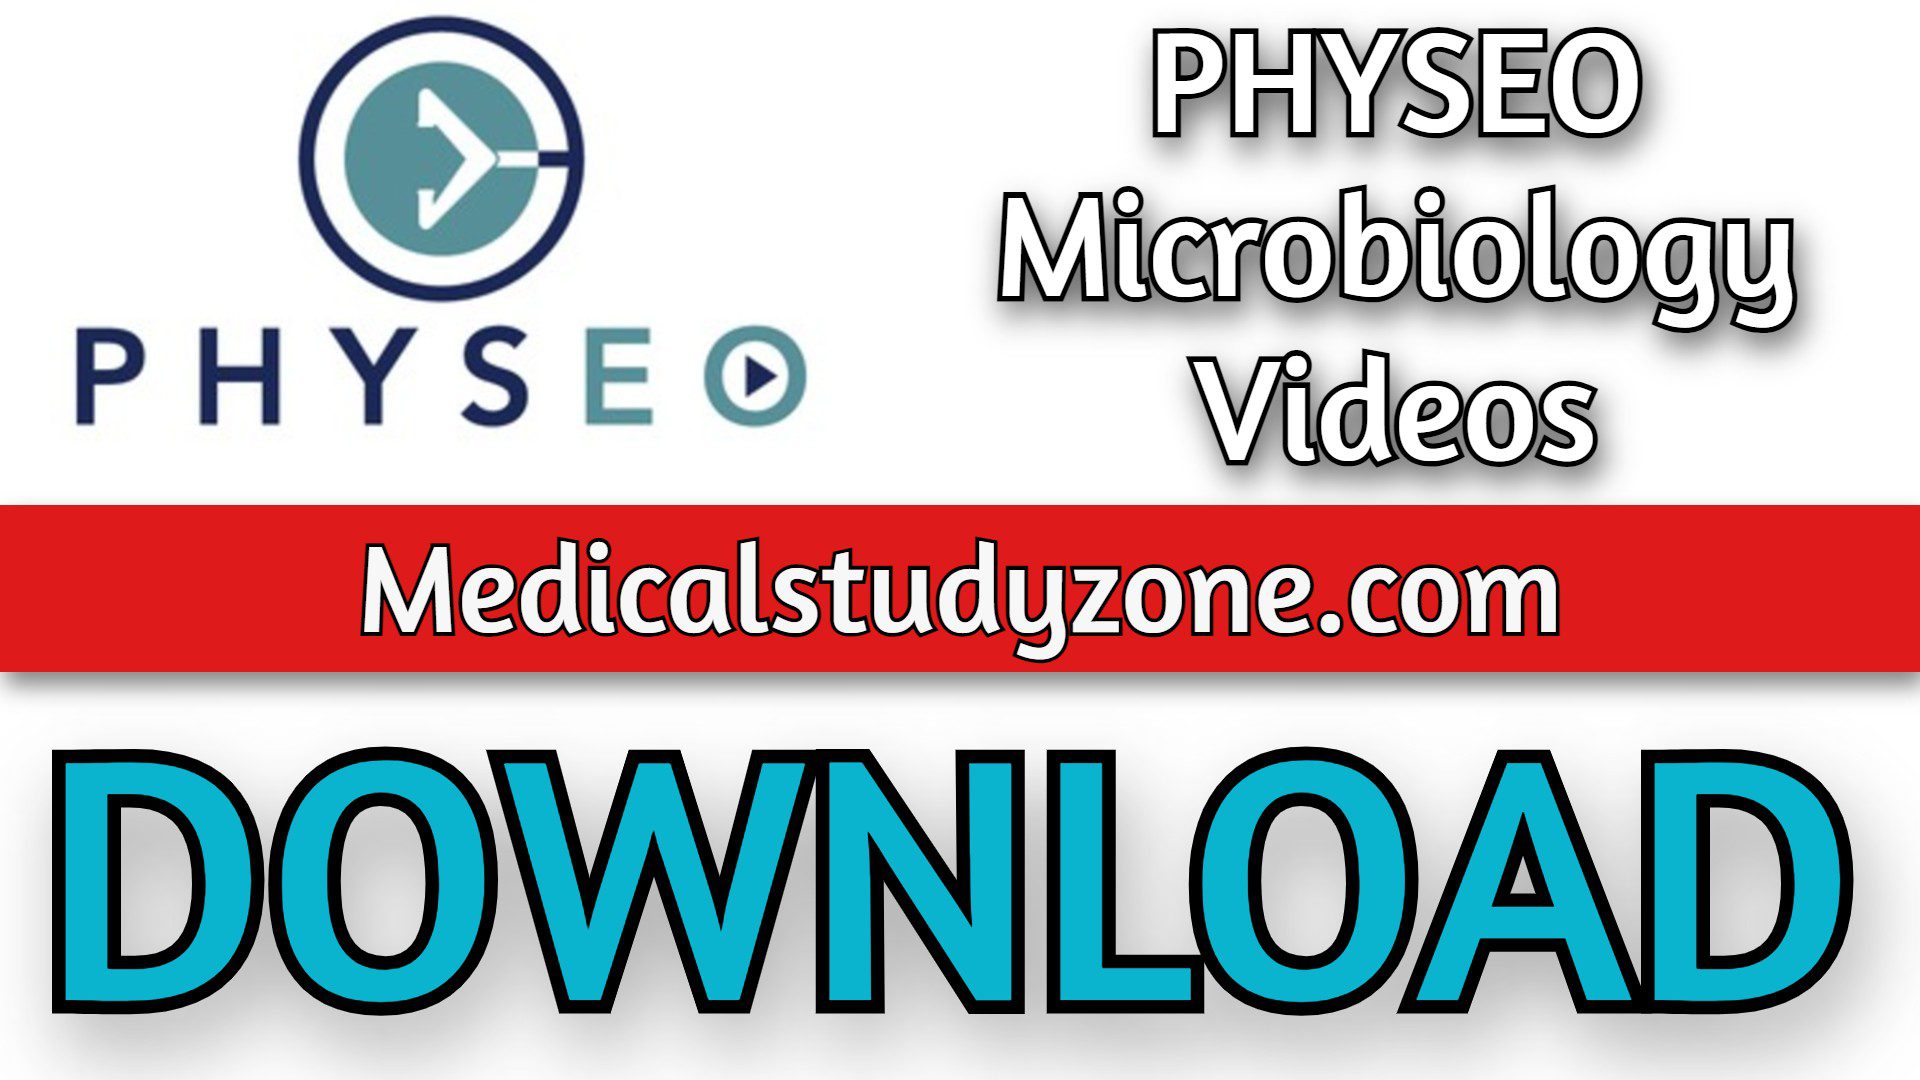 PHYSEO Microbiology Videos 2021 Free Download